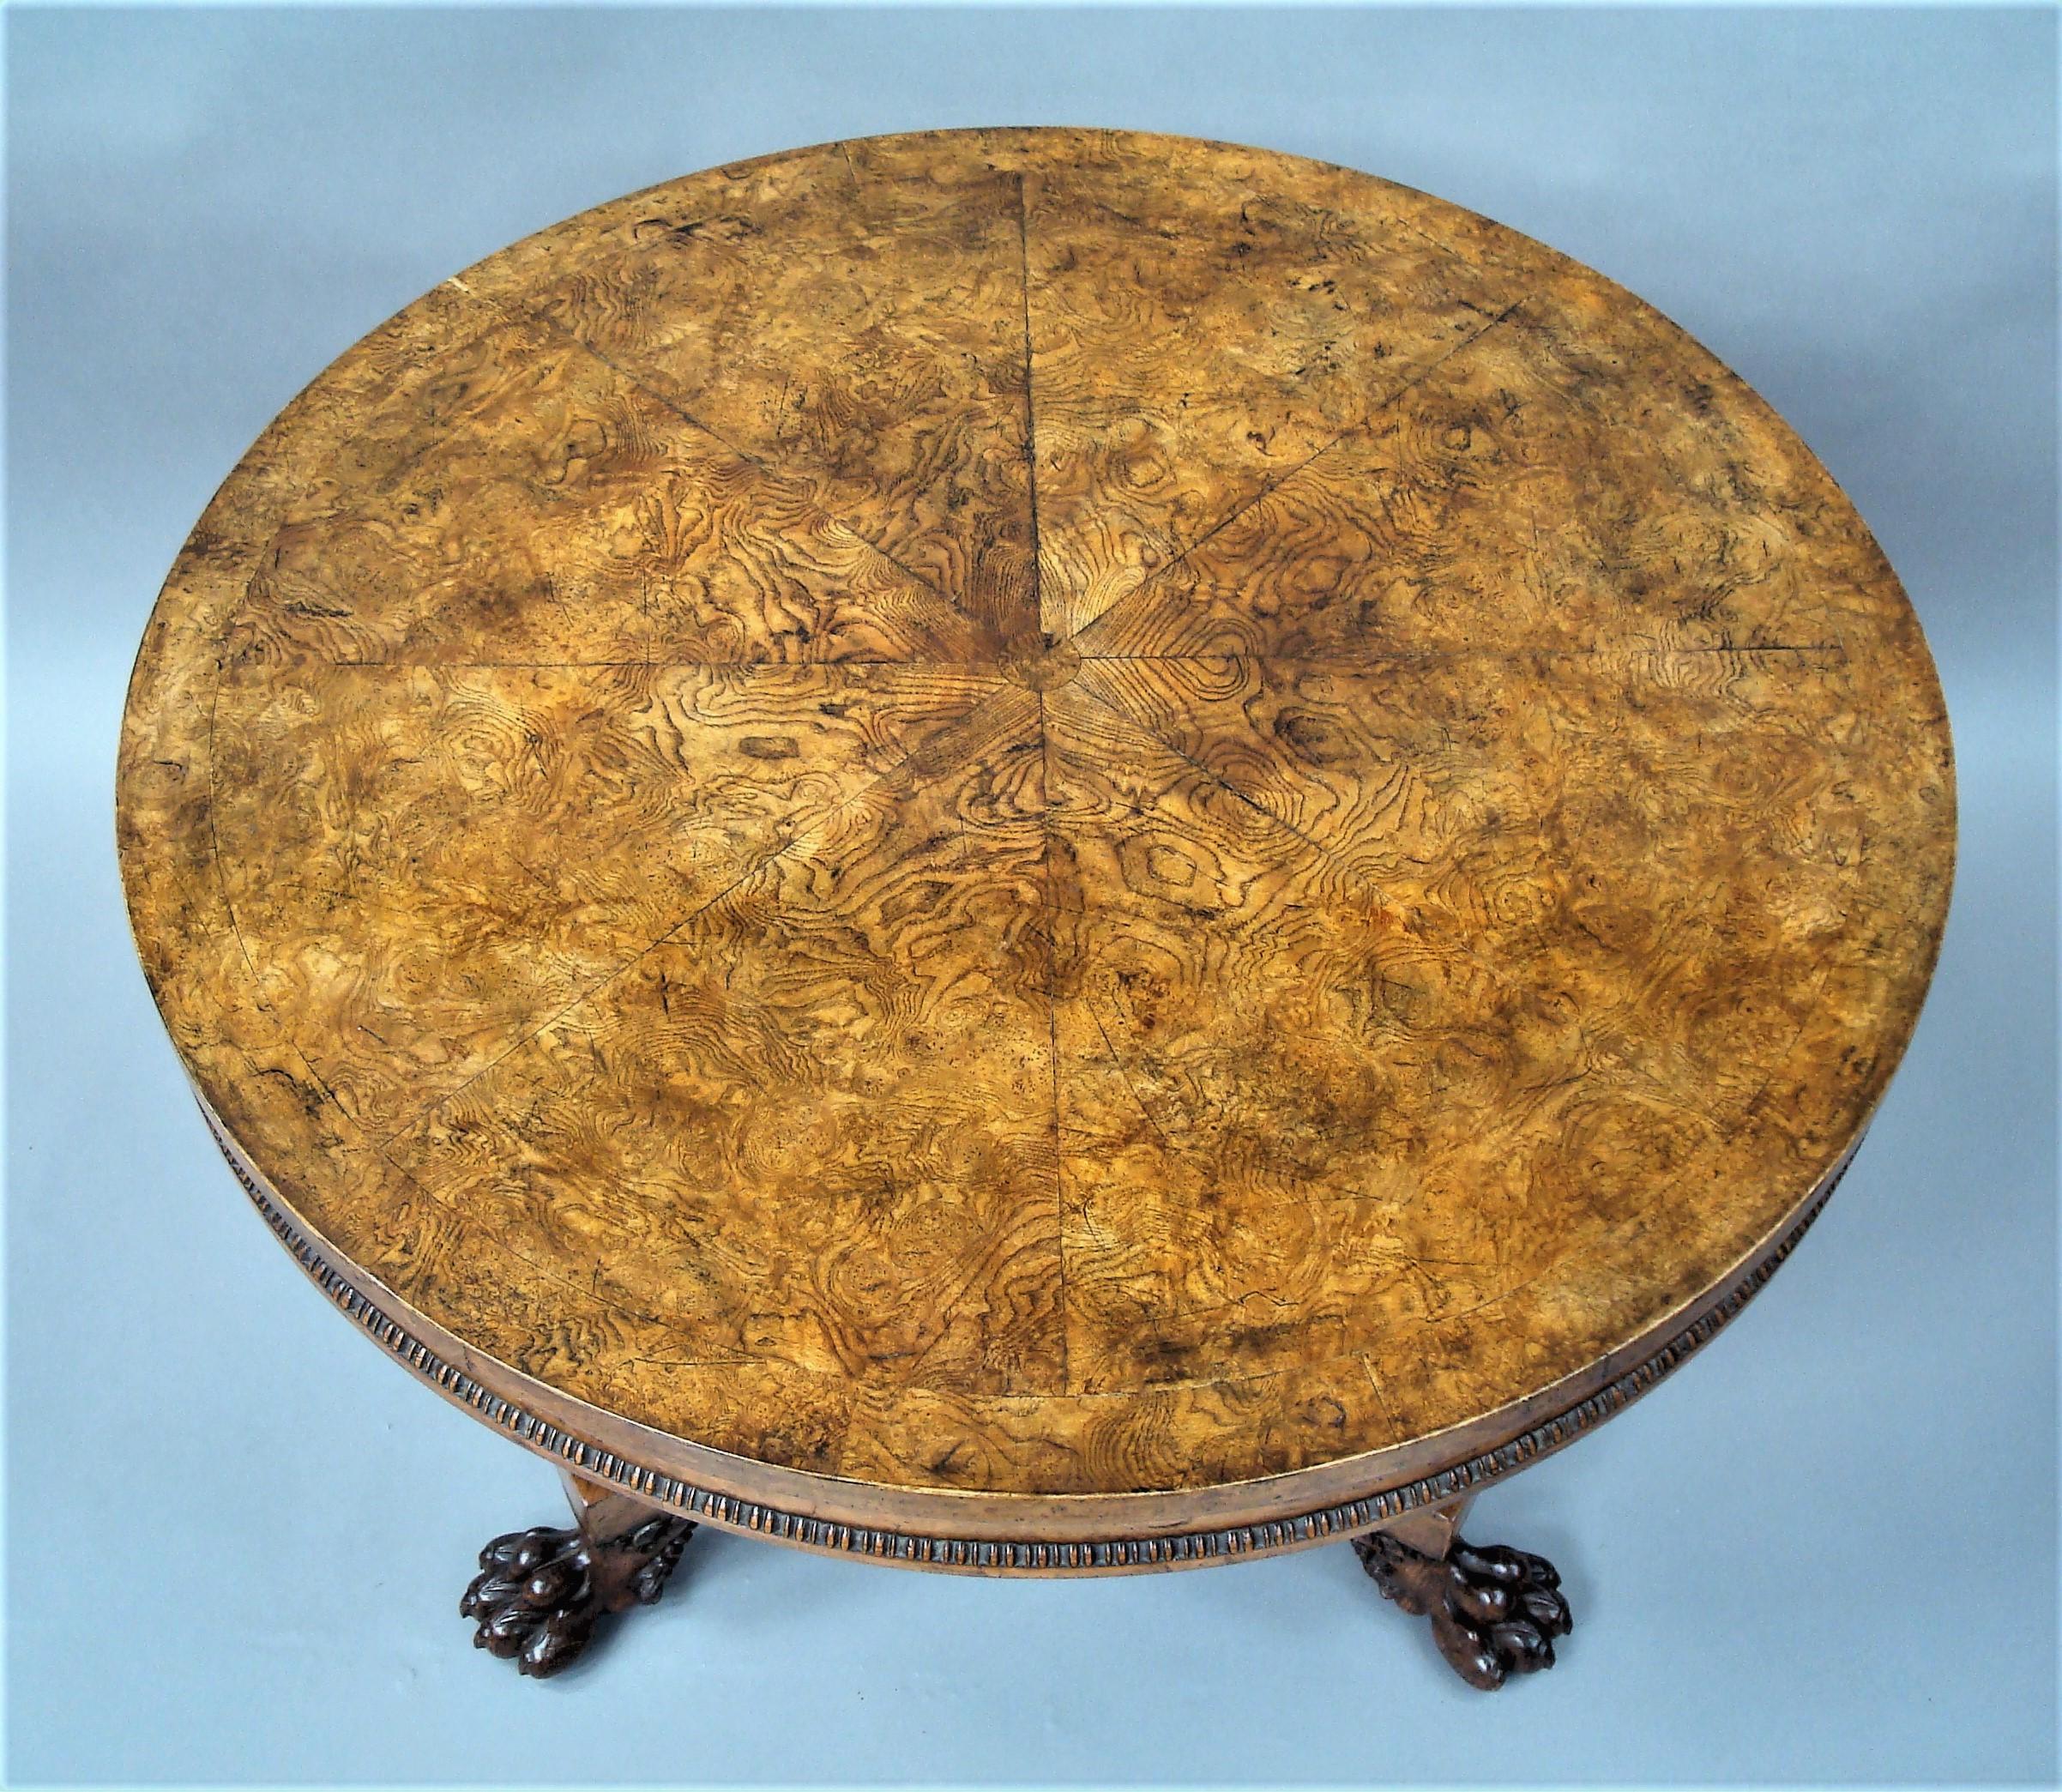 Regency Burr Ash, Elm and Oak Centre Table In Good Condition For Sale In Moreton-in-Marsh, Gloucestershire